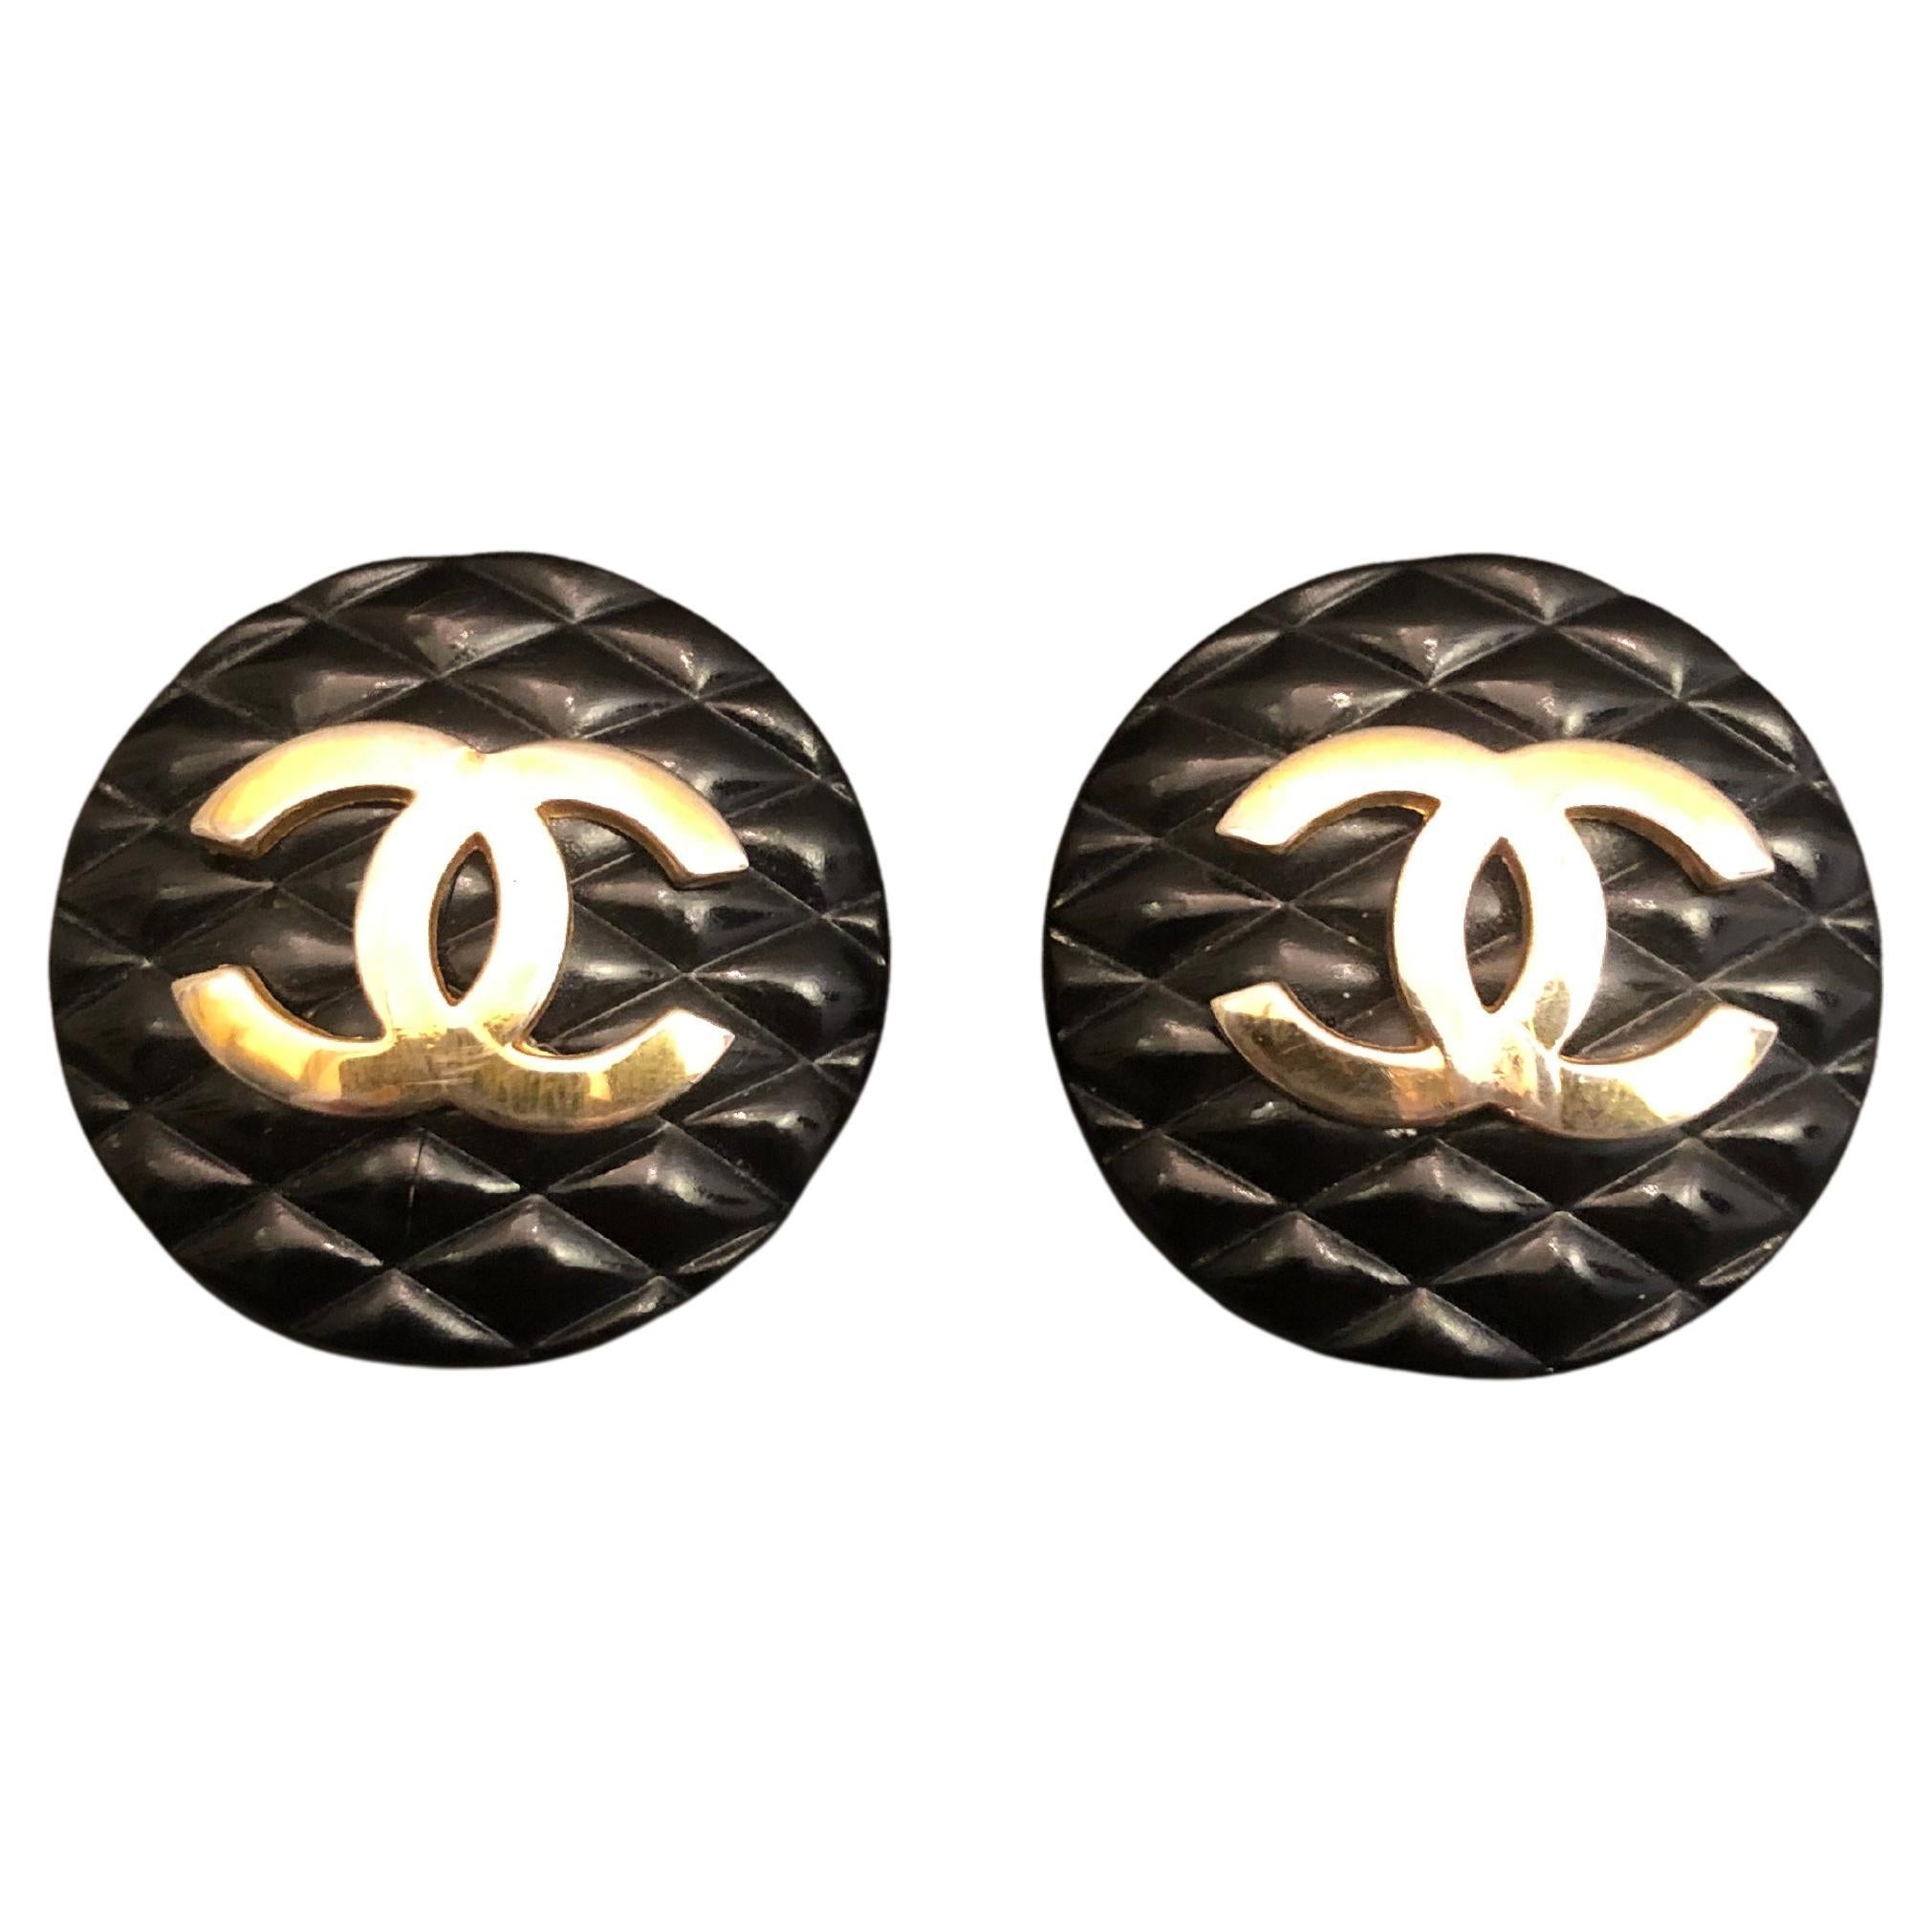 Vintage CHANEL Jumbo Quilted Resin Button Earrings Black Gold